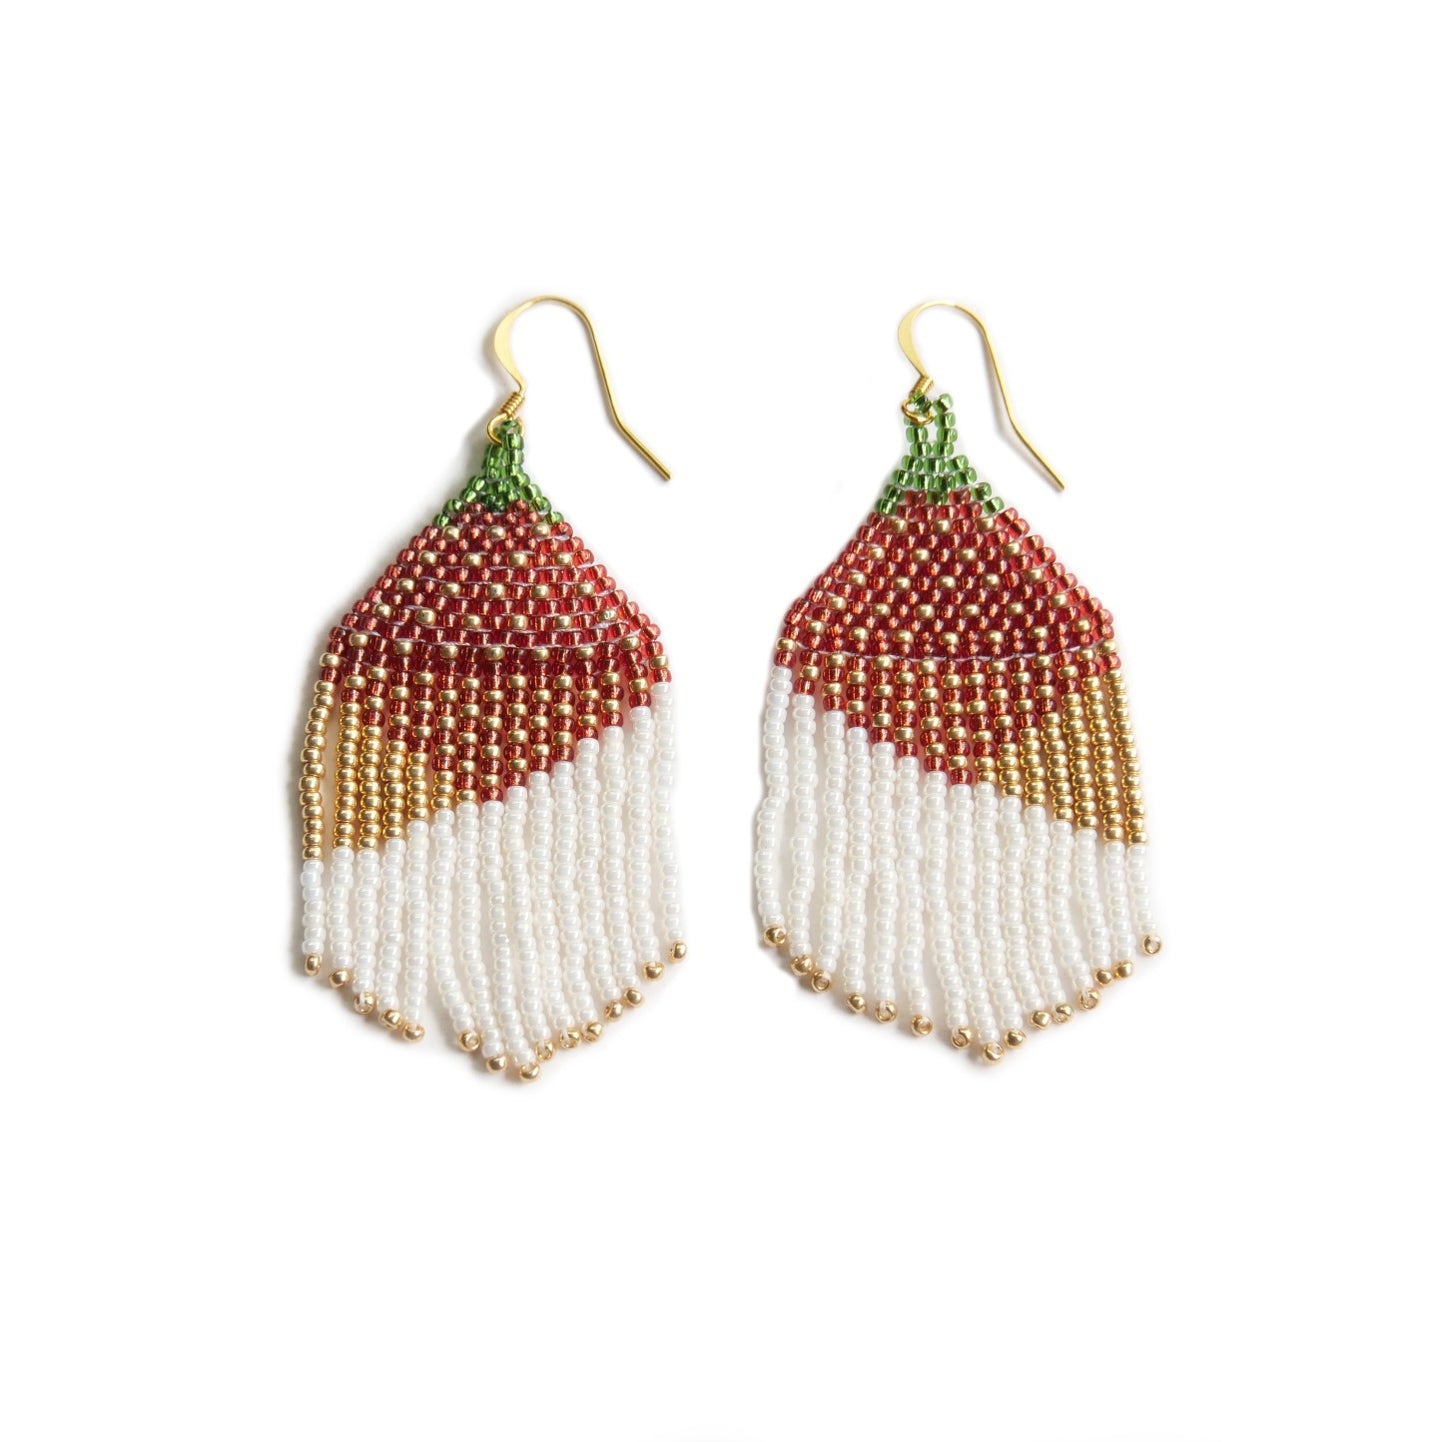 Strawberry coloured beaded earrings handmade by Canadian indigenous artist Bead n' Butter.